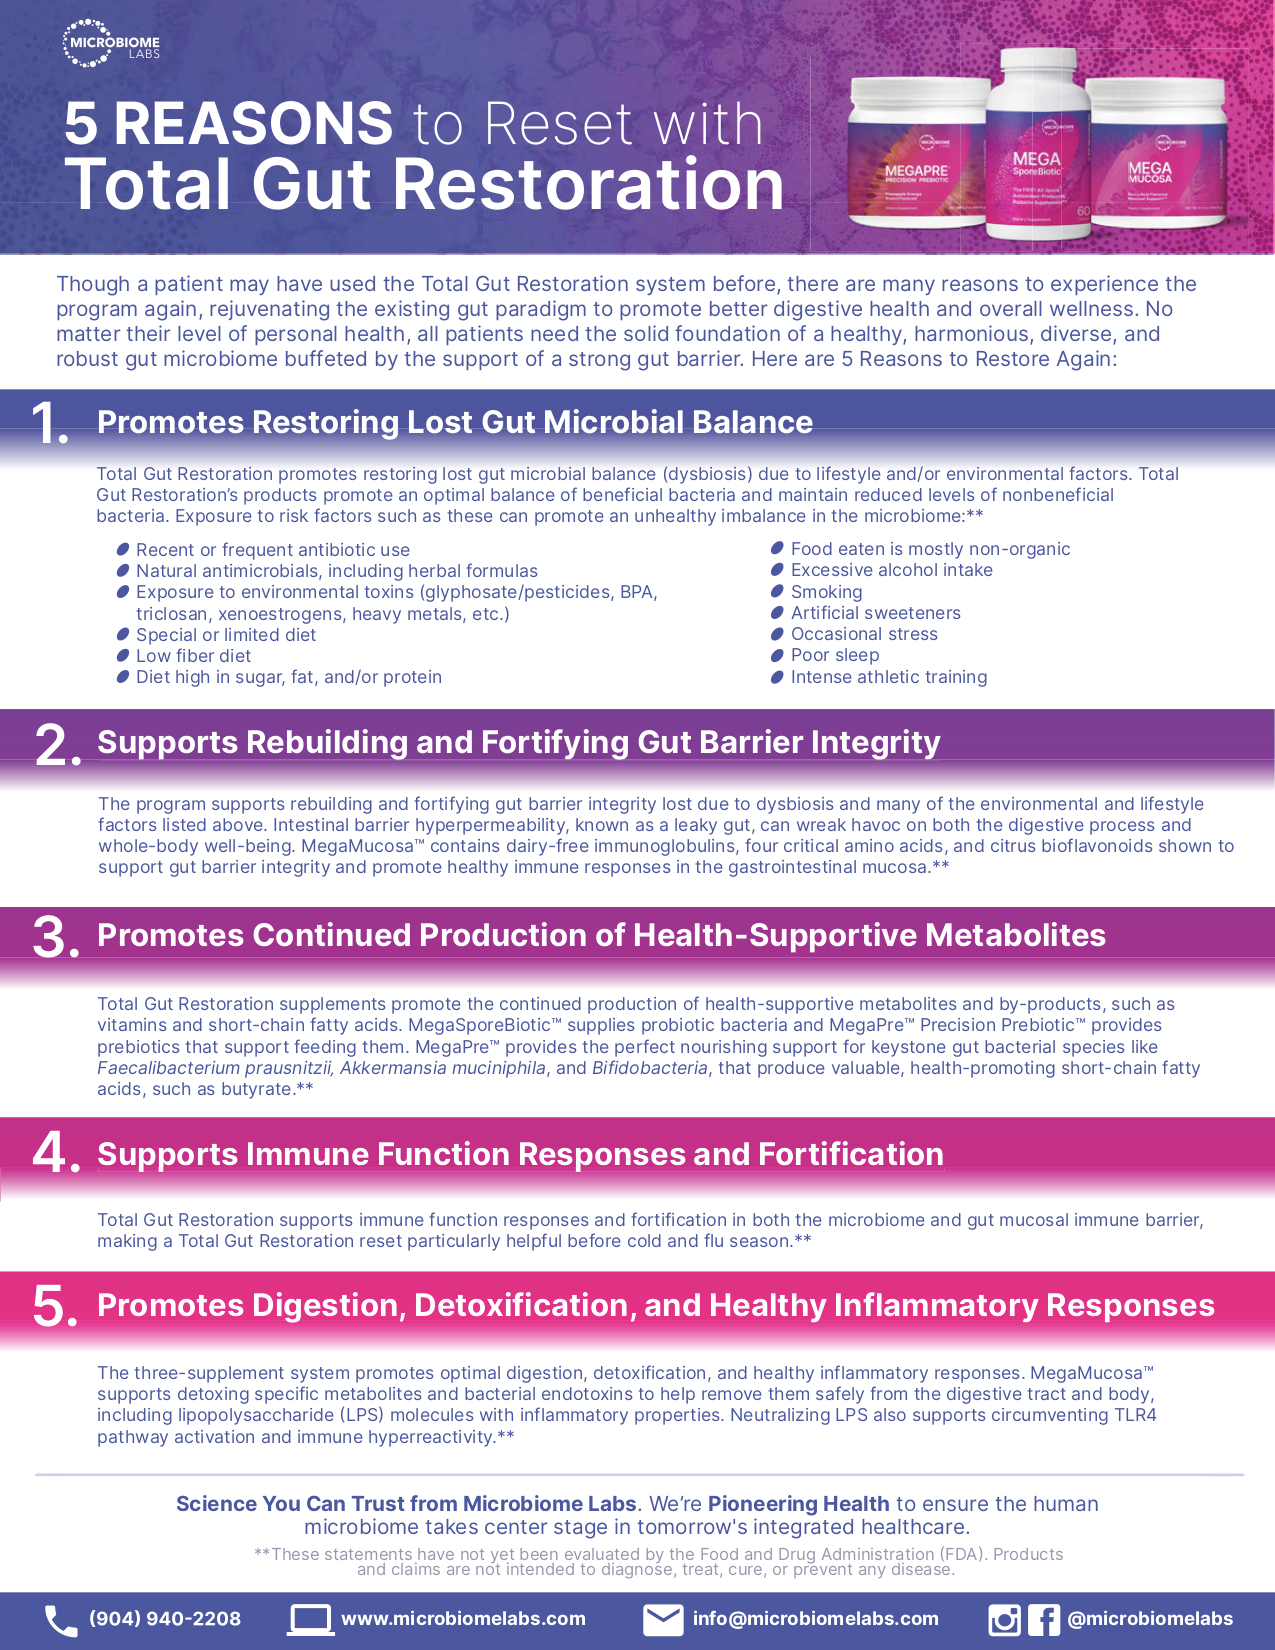 5 Reasons to Reset with Total Gut Restoration